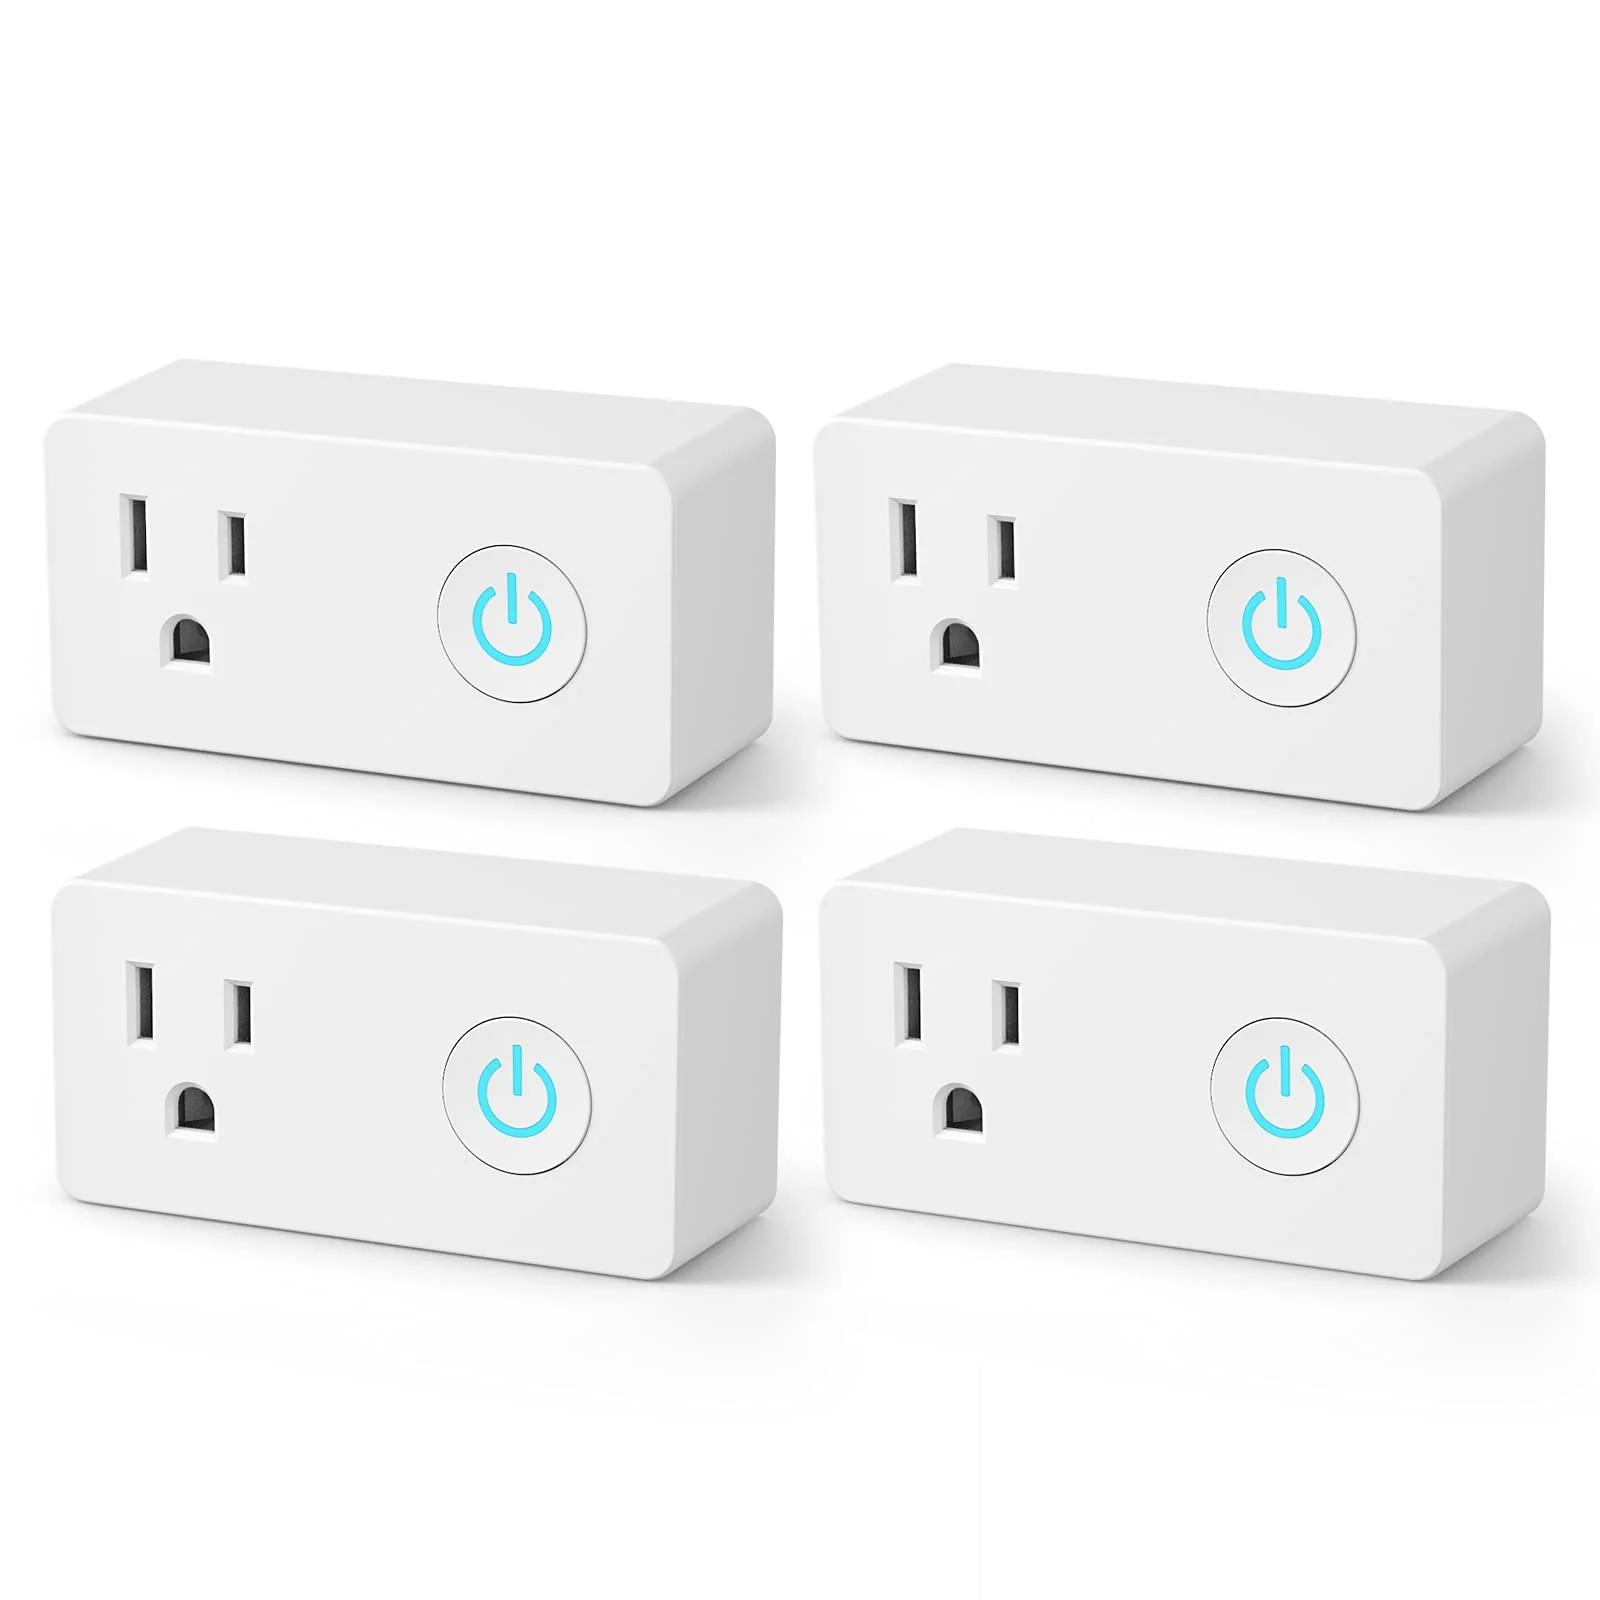 Improving Home Automation with the Support of Automation: The BN-LINK Smart Outlet Timer